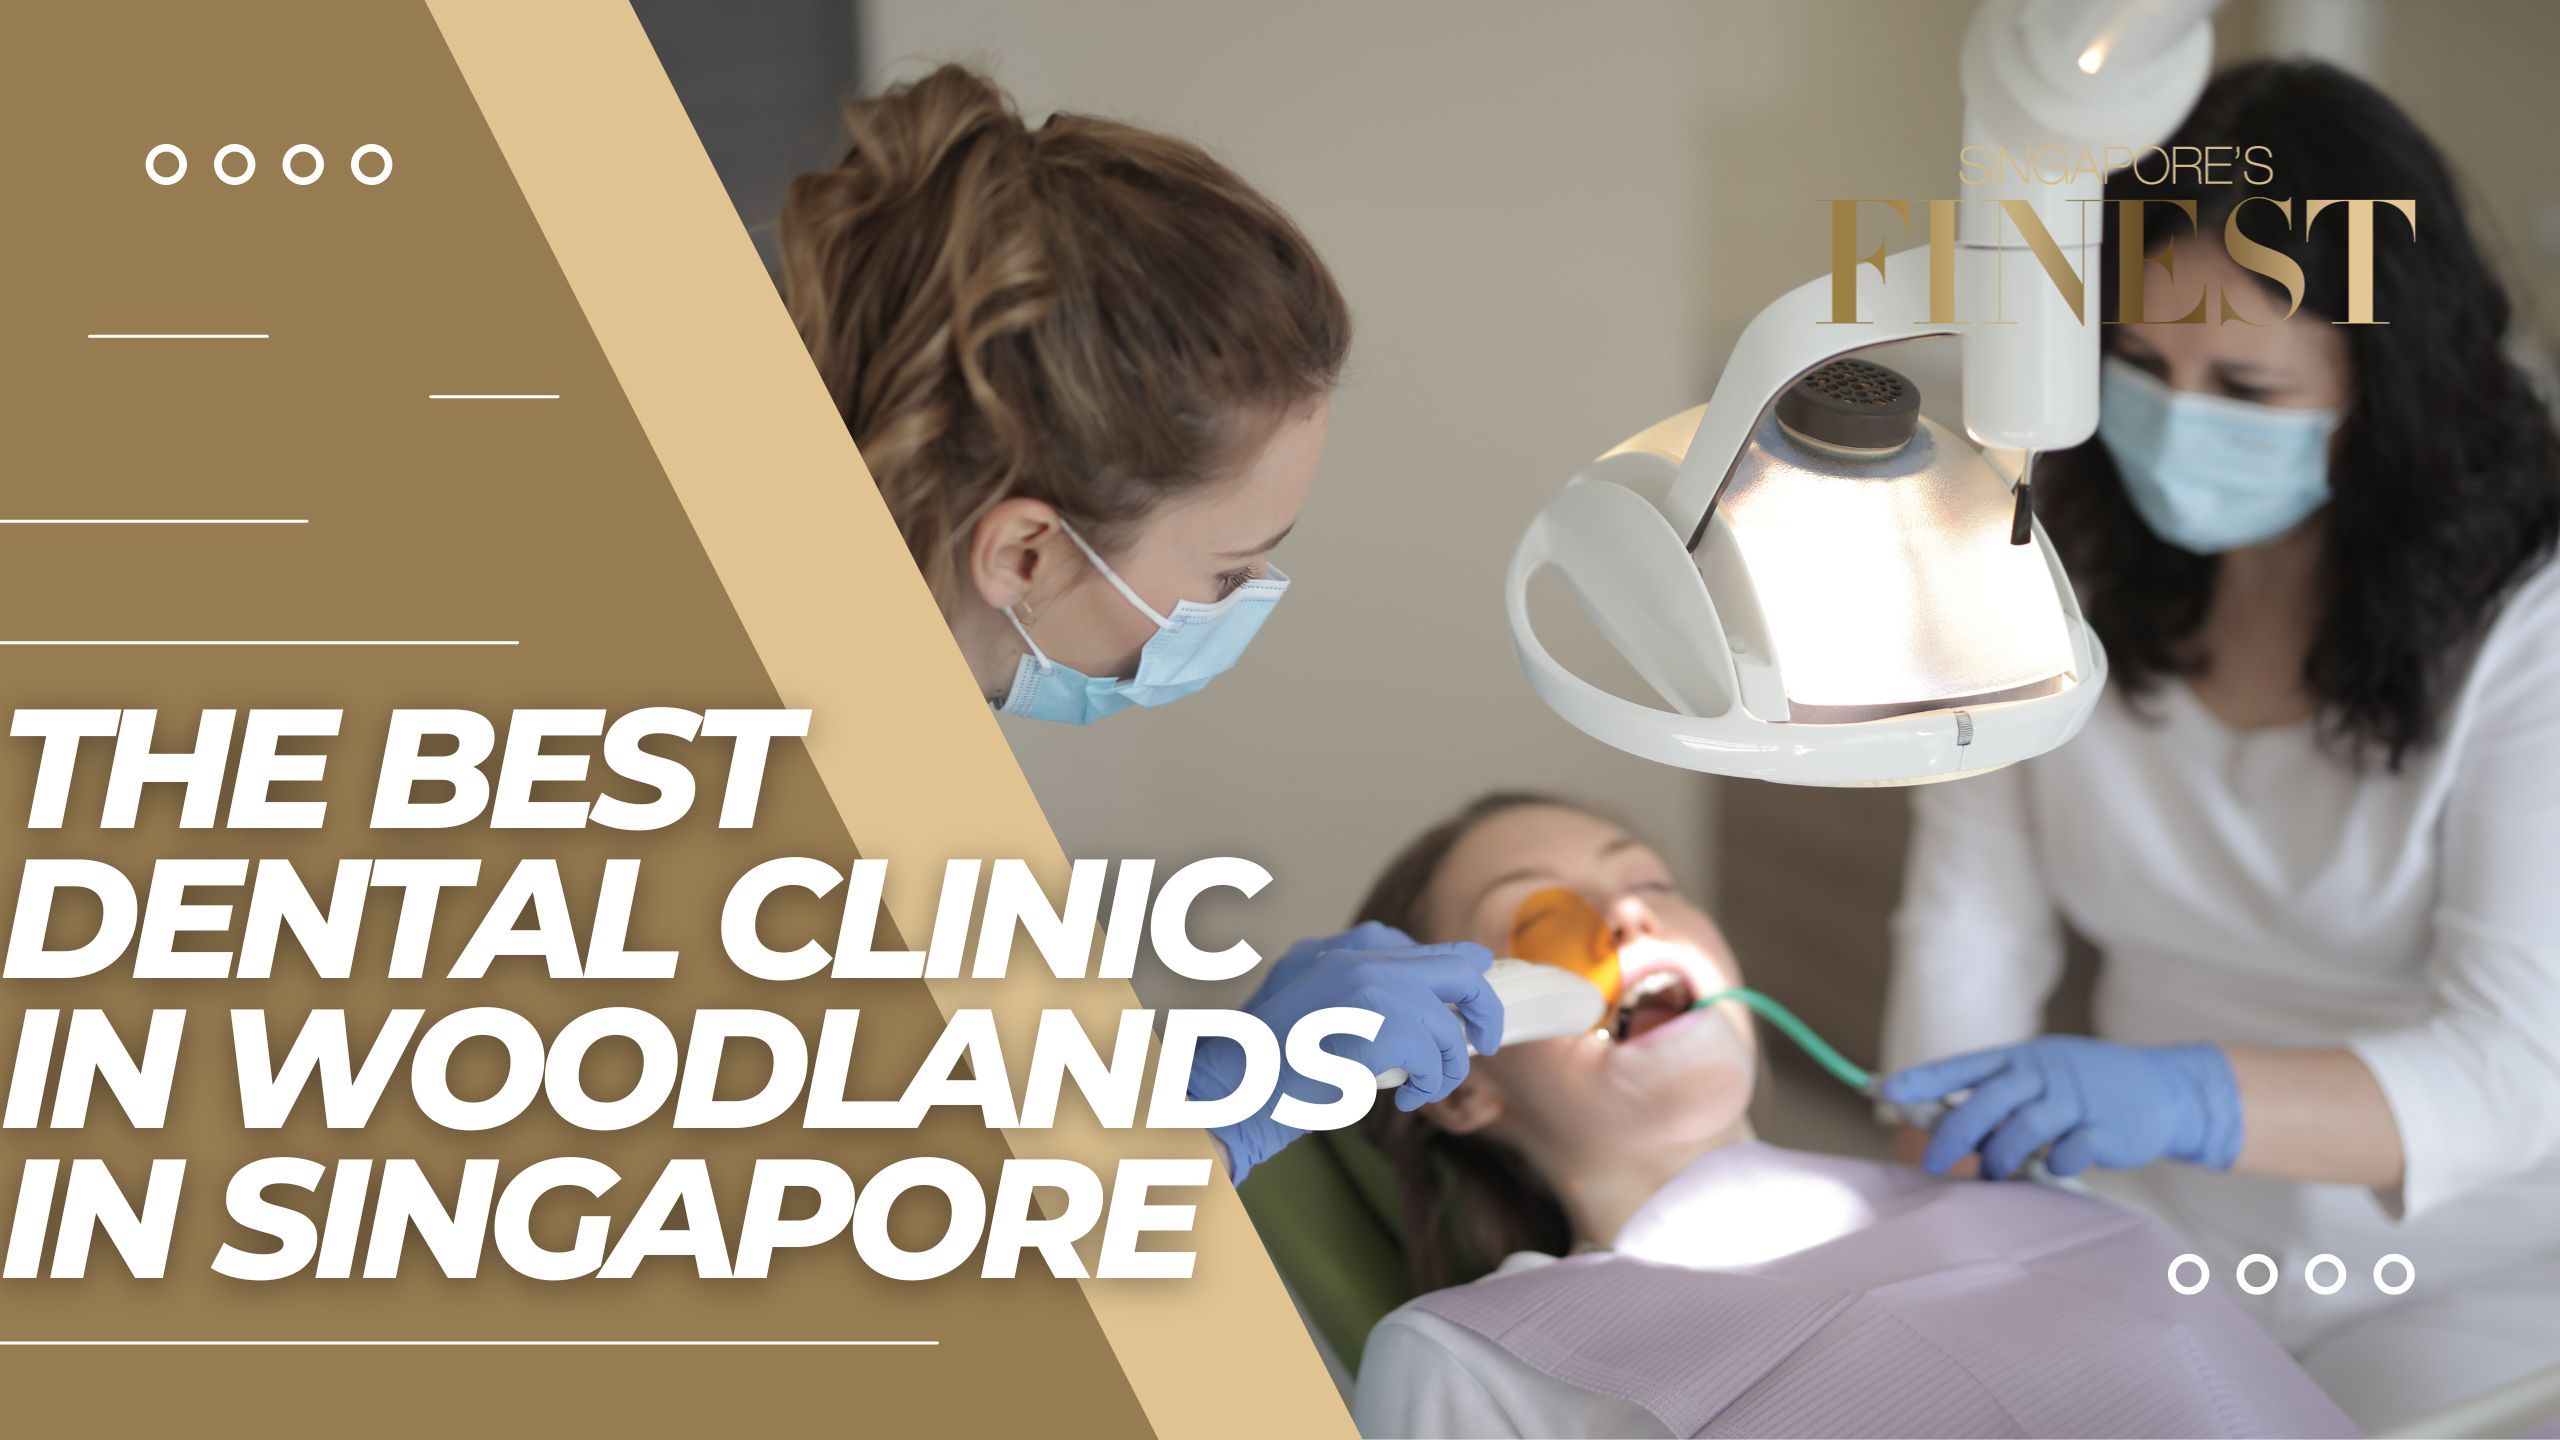 The Finest Dental Clinics In Woodlands Singapore